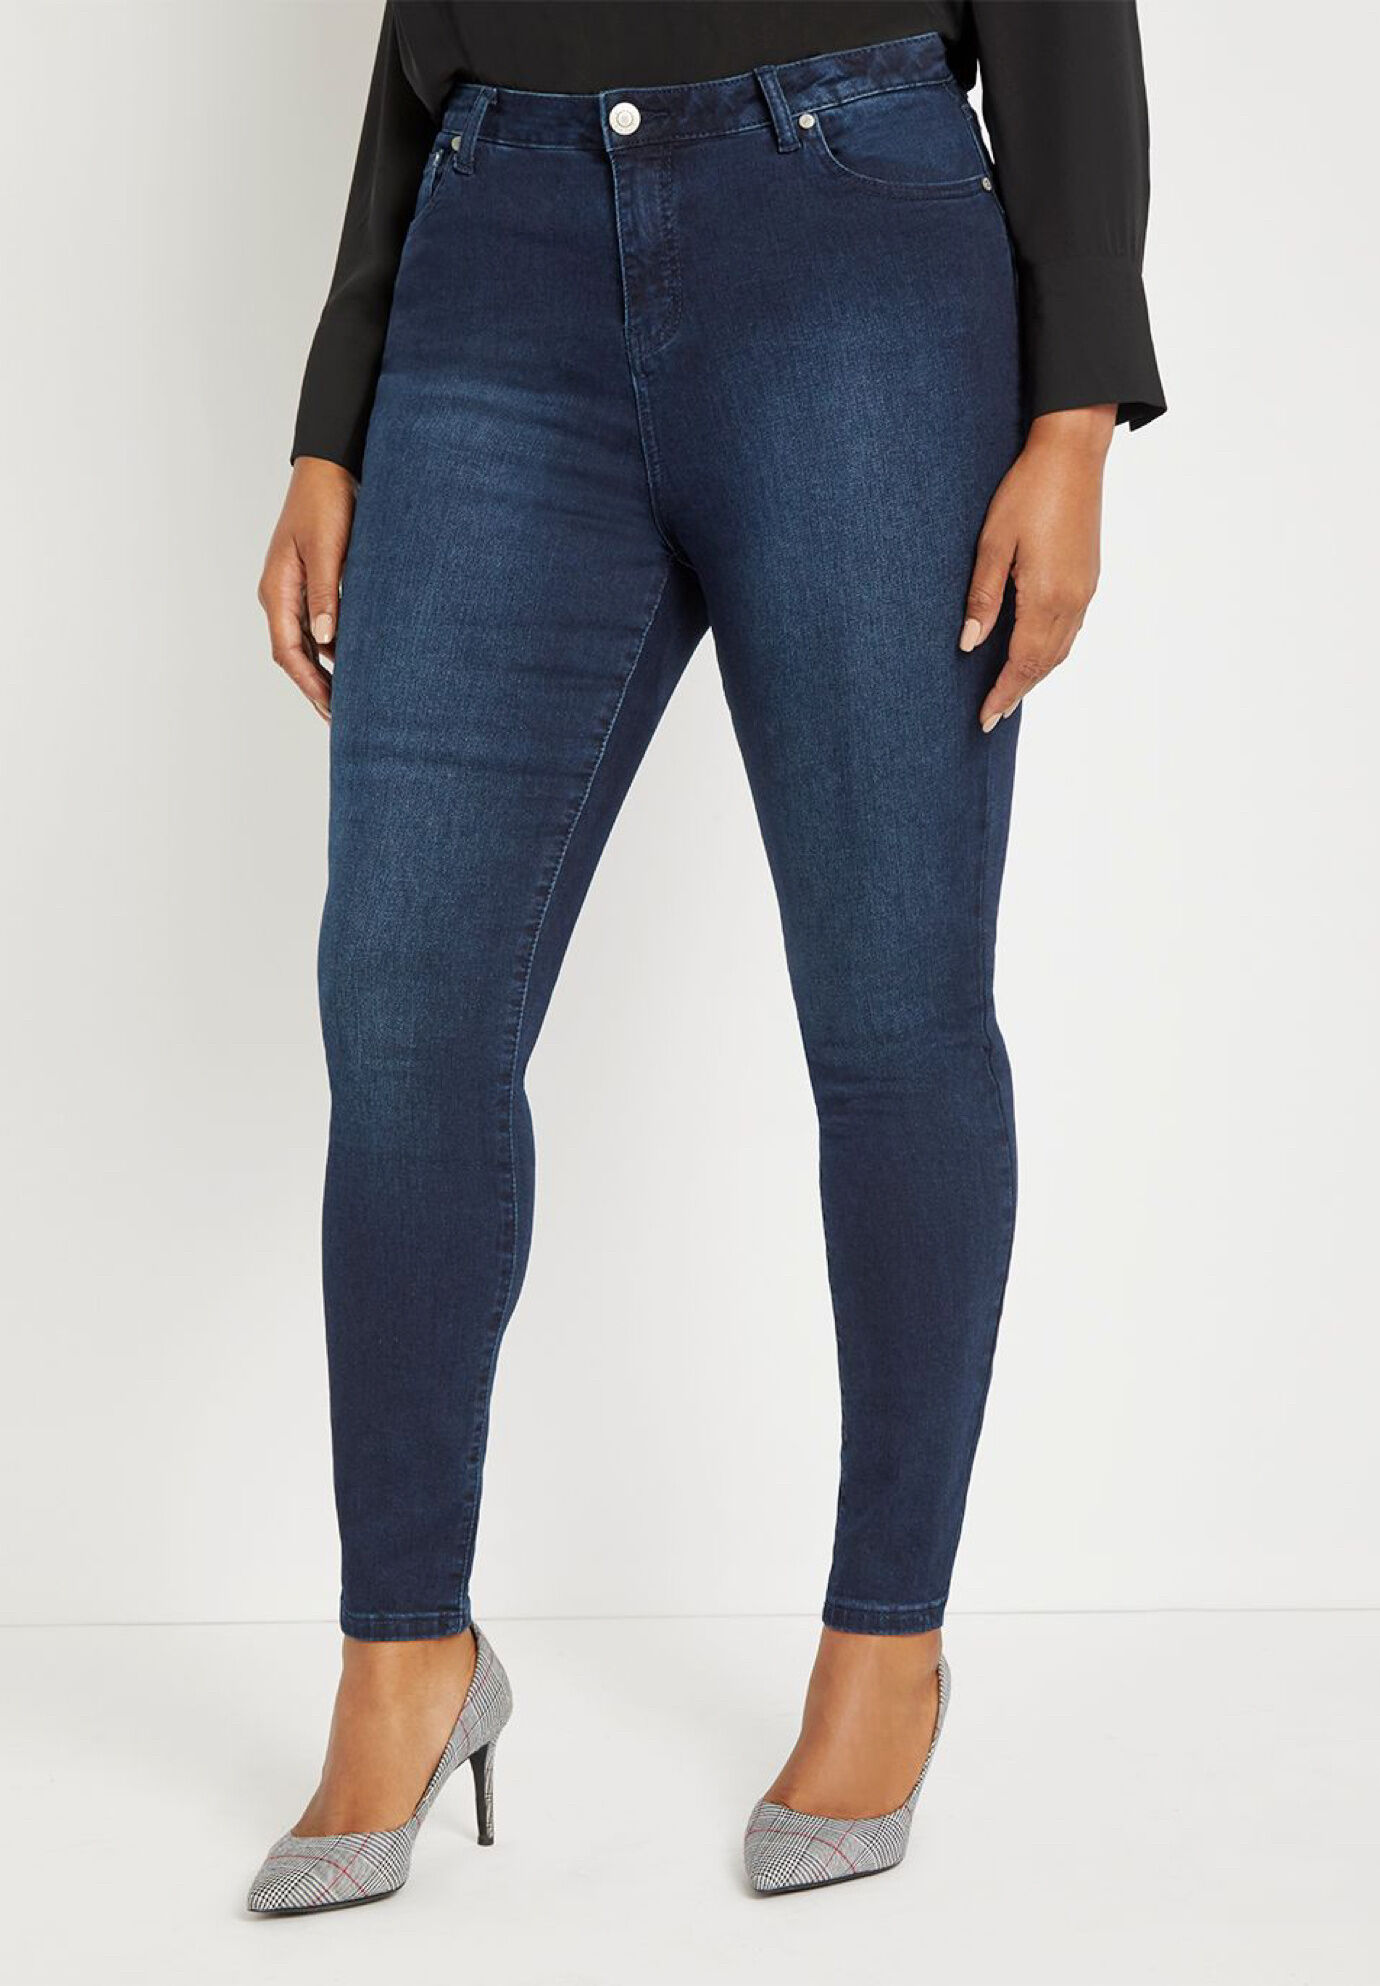 Plus Size Women Classic Fit Sculpting Skinny Jean By ( Size 28 )